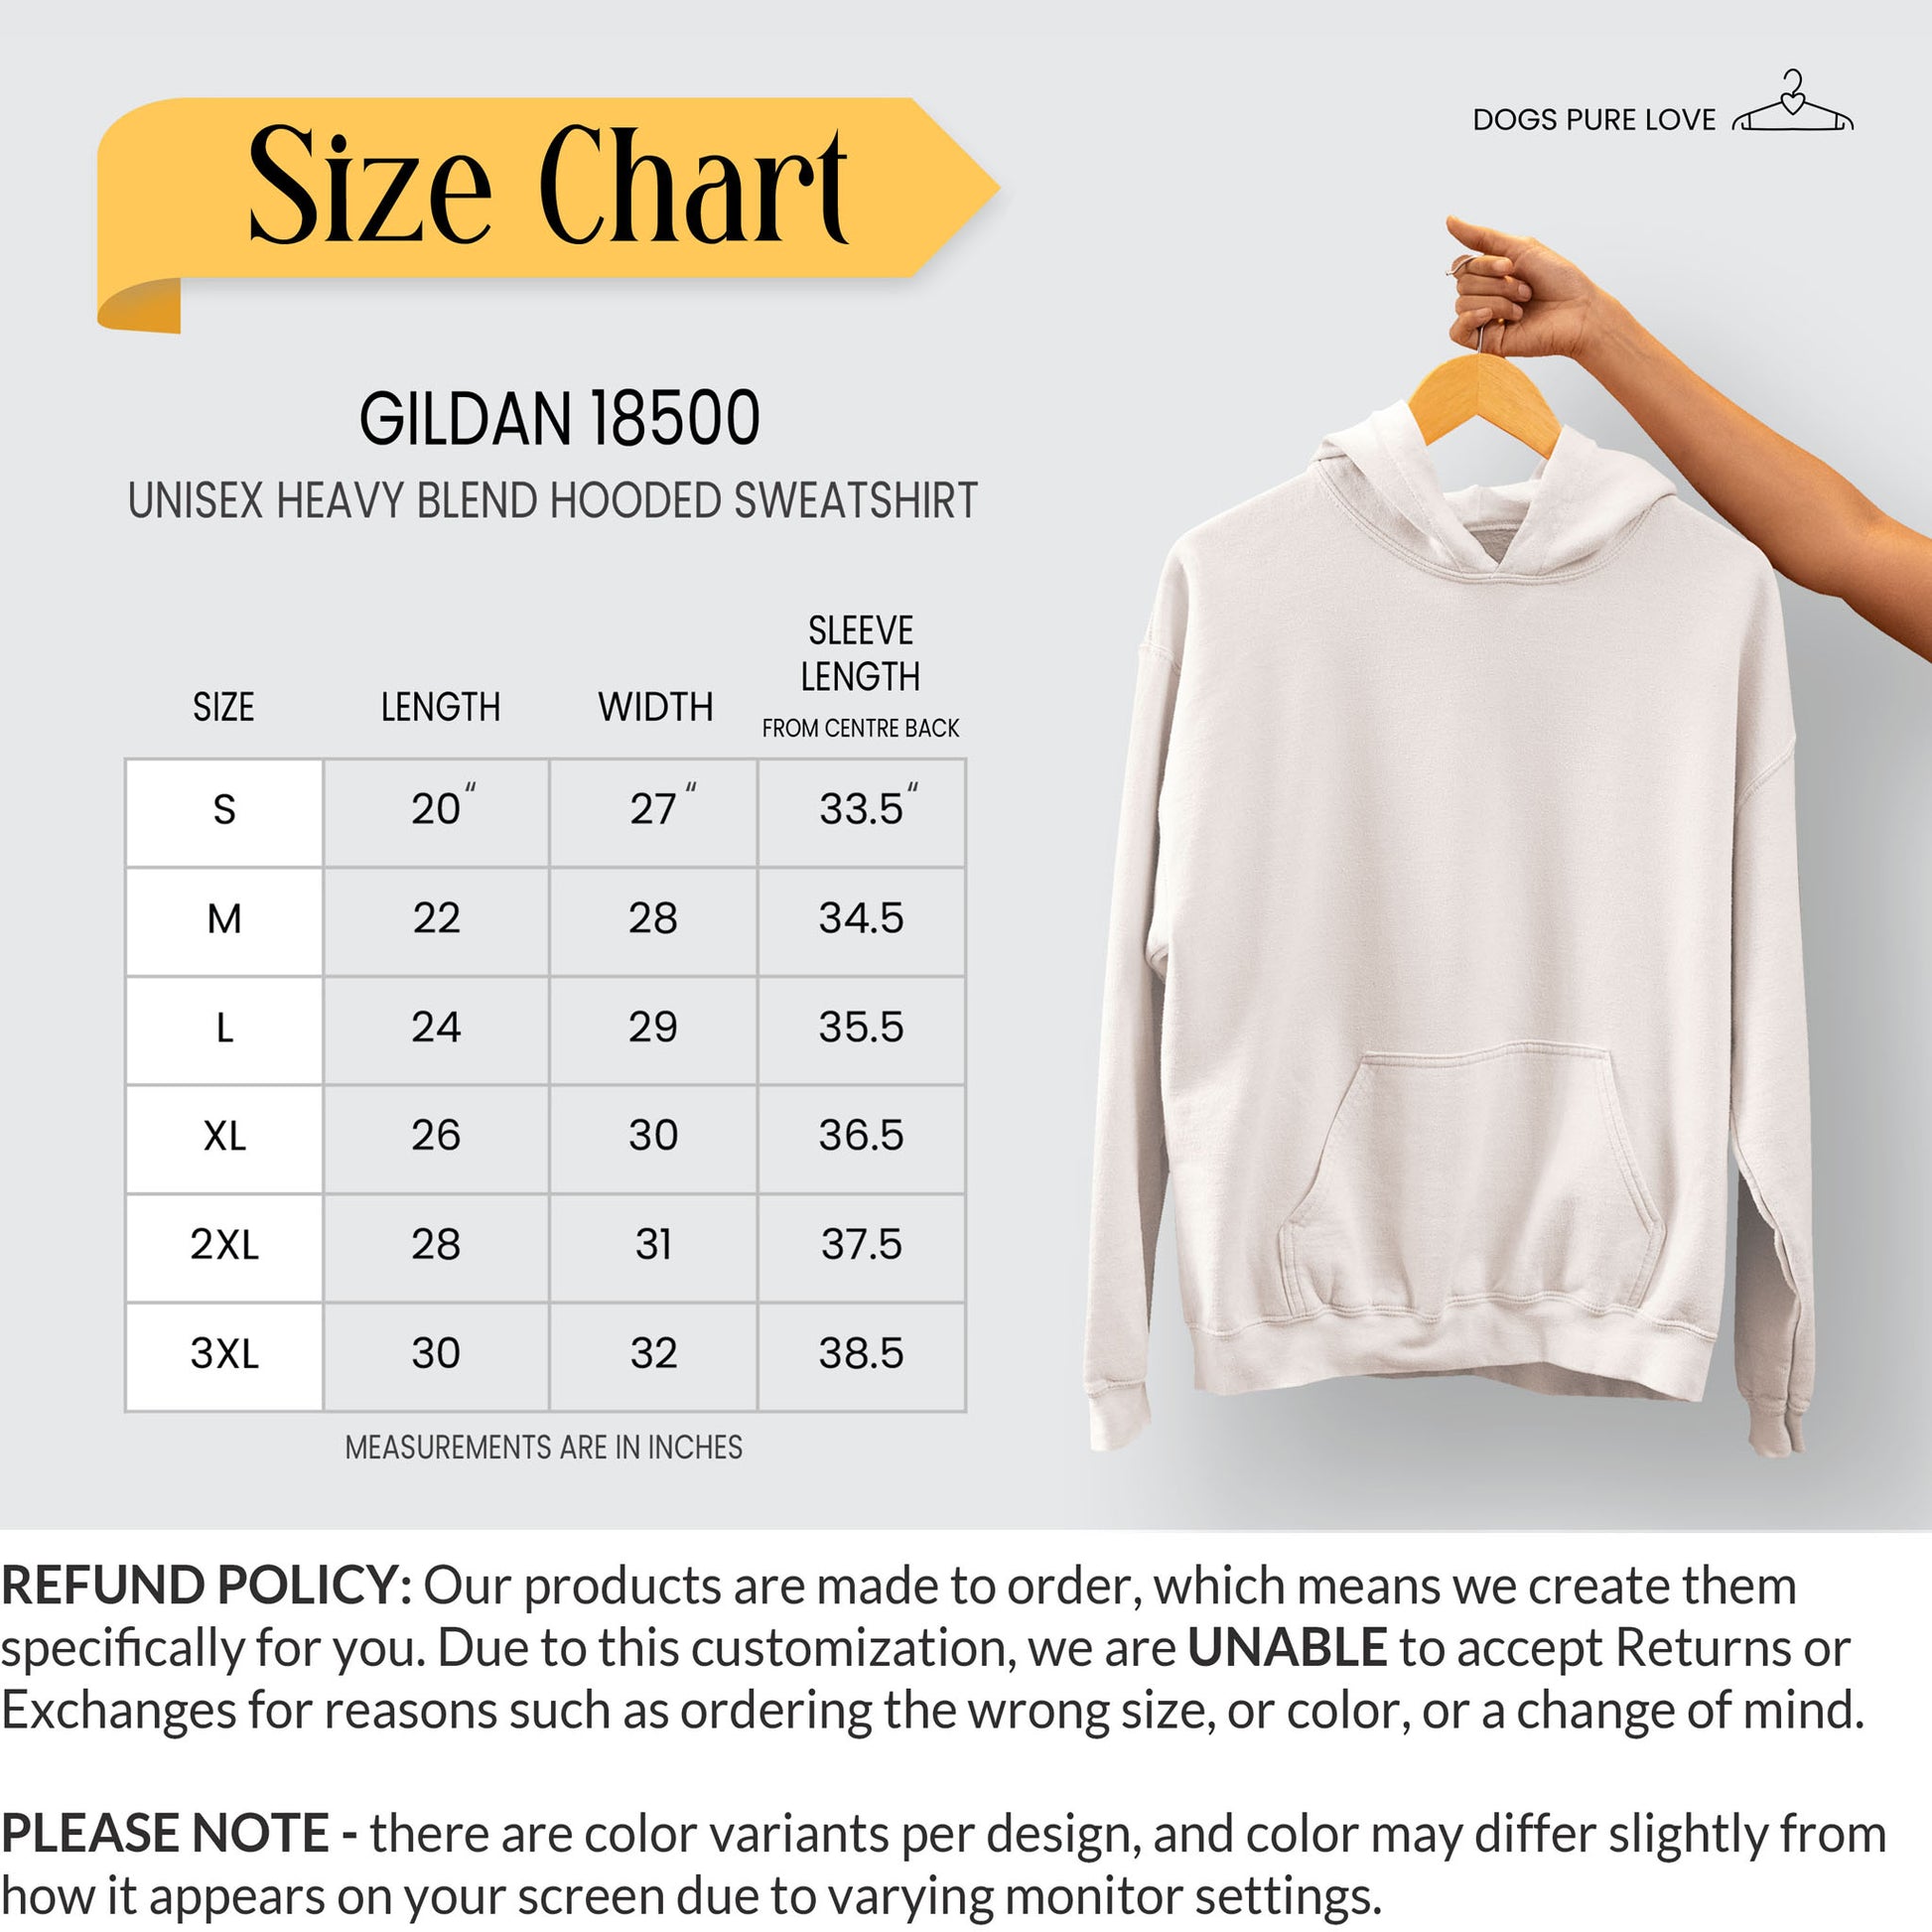 A size chart for Dogs Pure Love hoodies, and a brief Refund Policy description is shown.